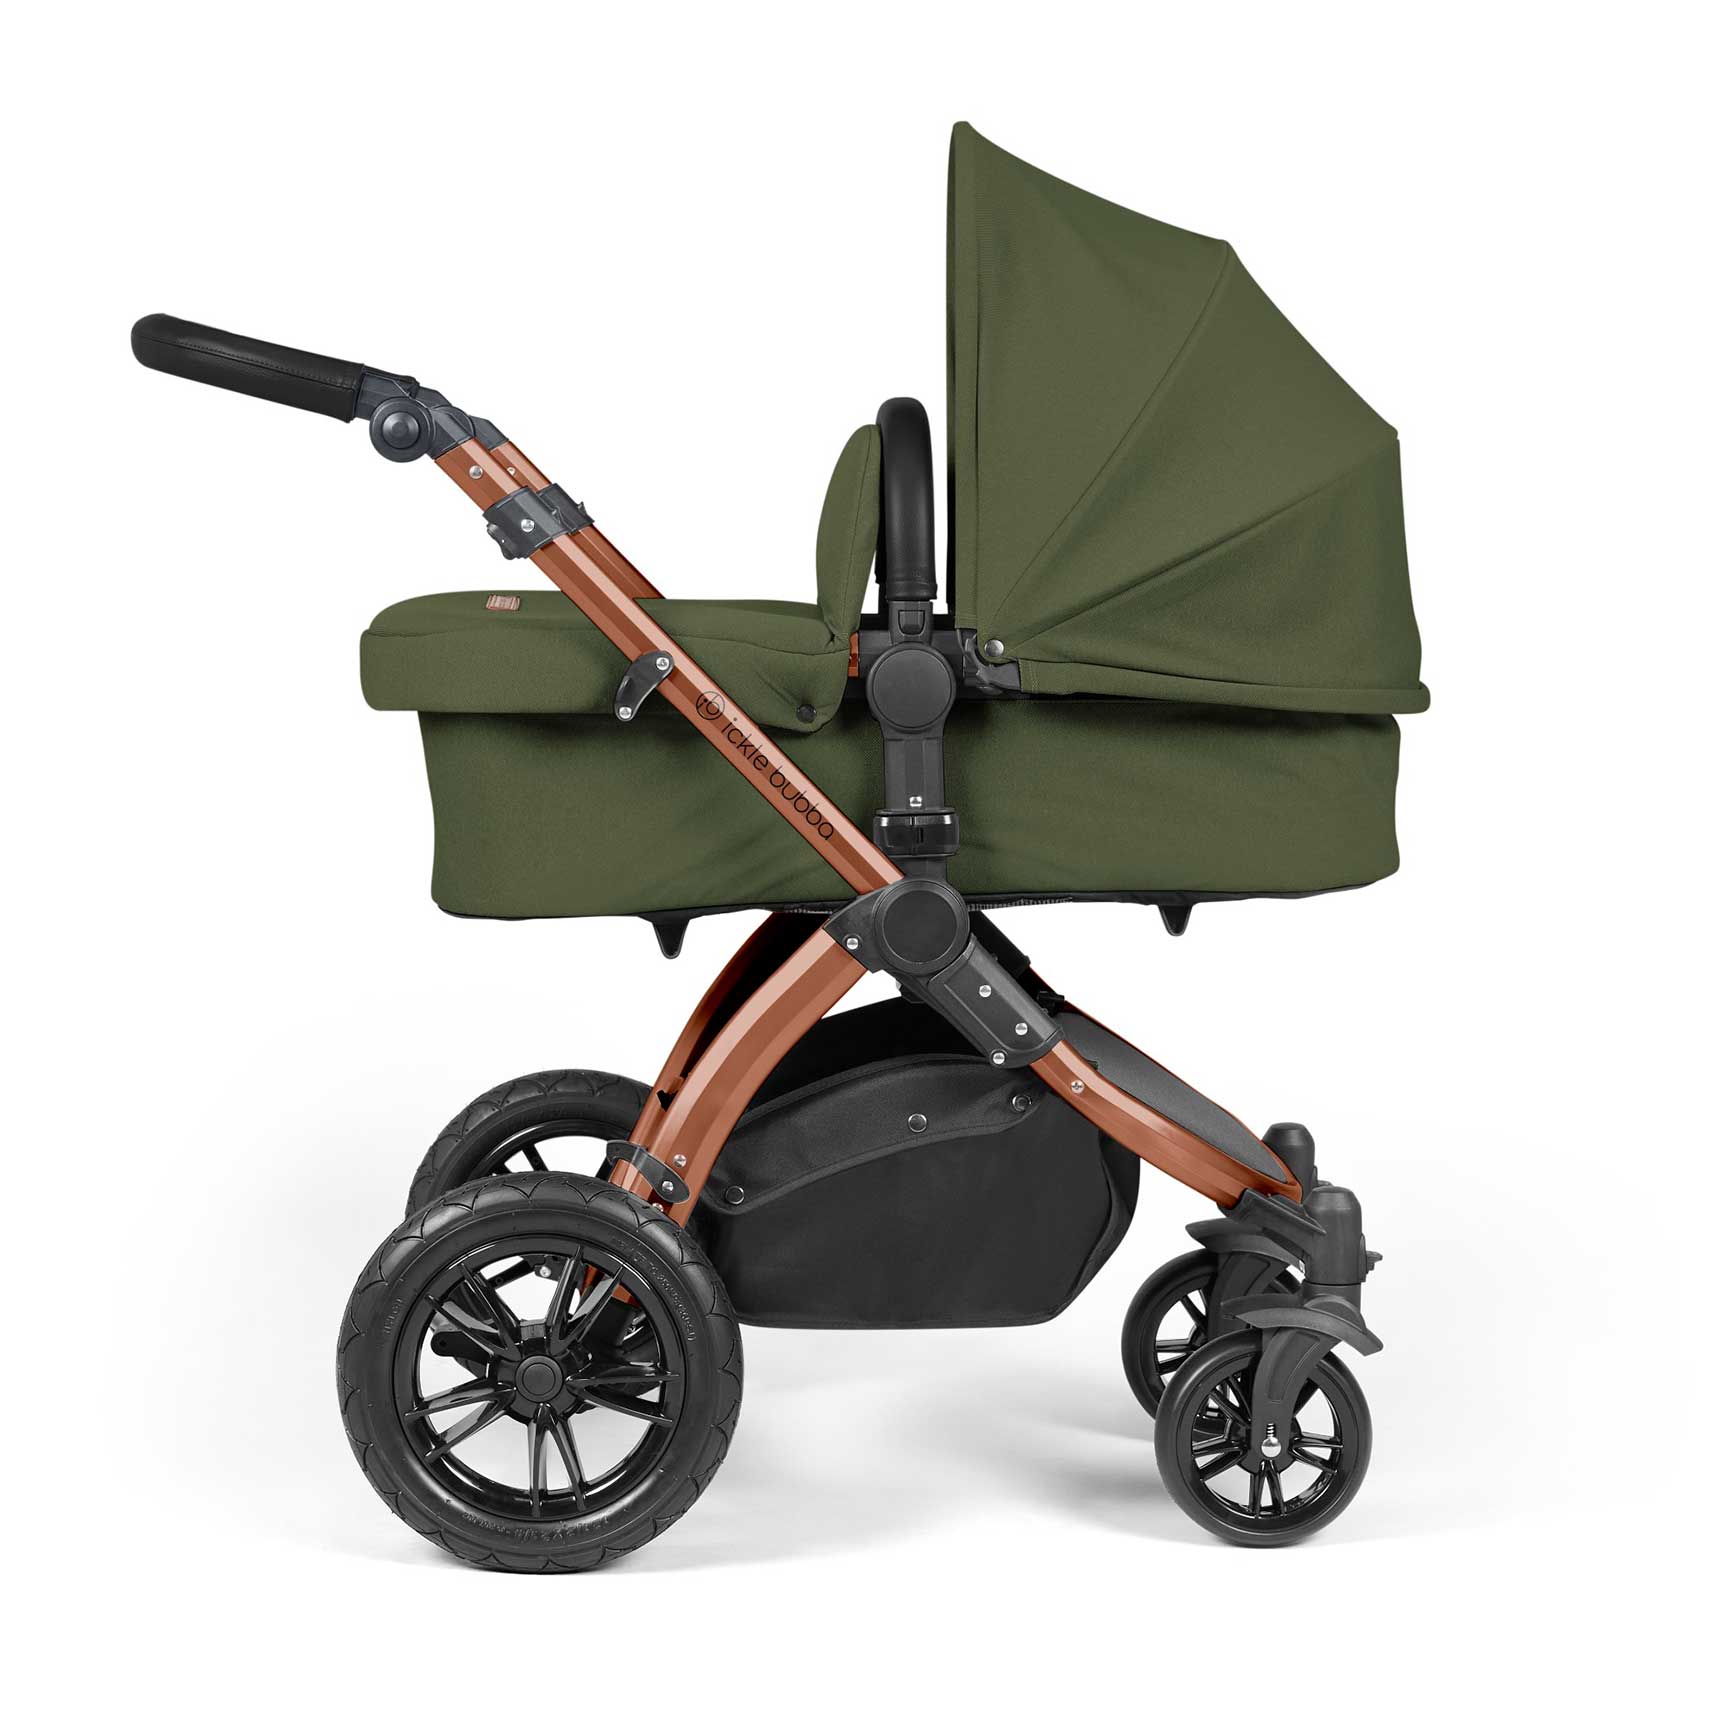 Ickle Bubba travel systems Ickle Bubba Stomp Luxe All-in-One Travel System with Isofix Base - Bronze/Woodland/Black 10-011-300-140